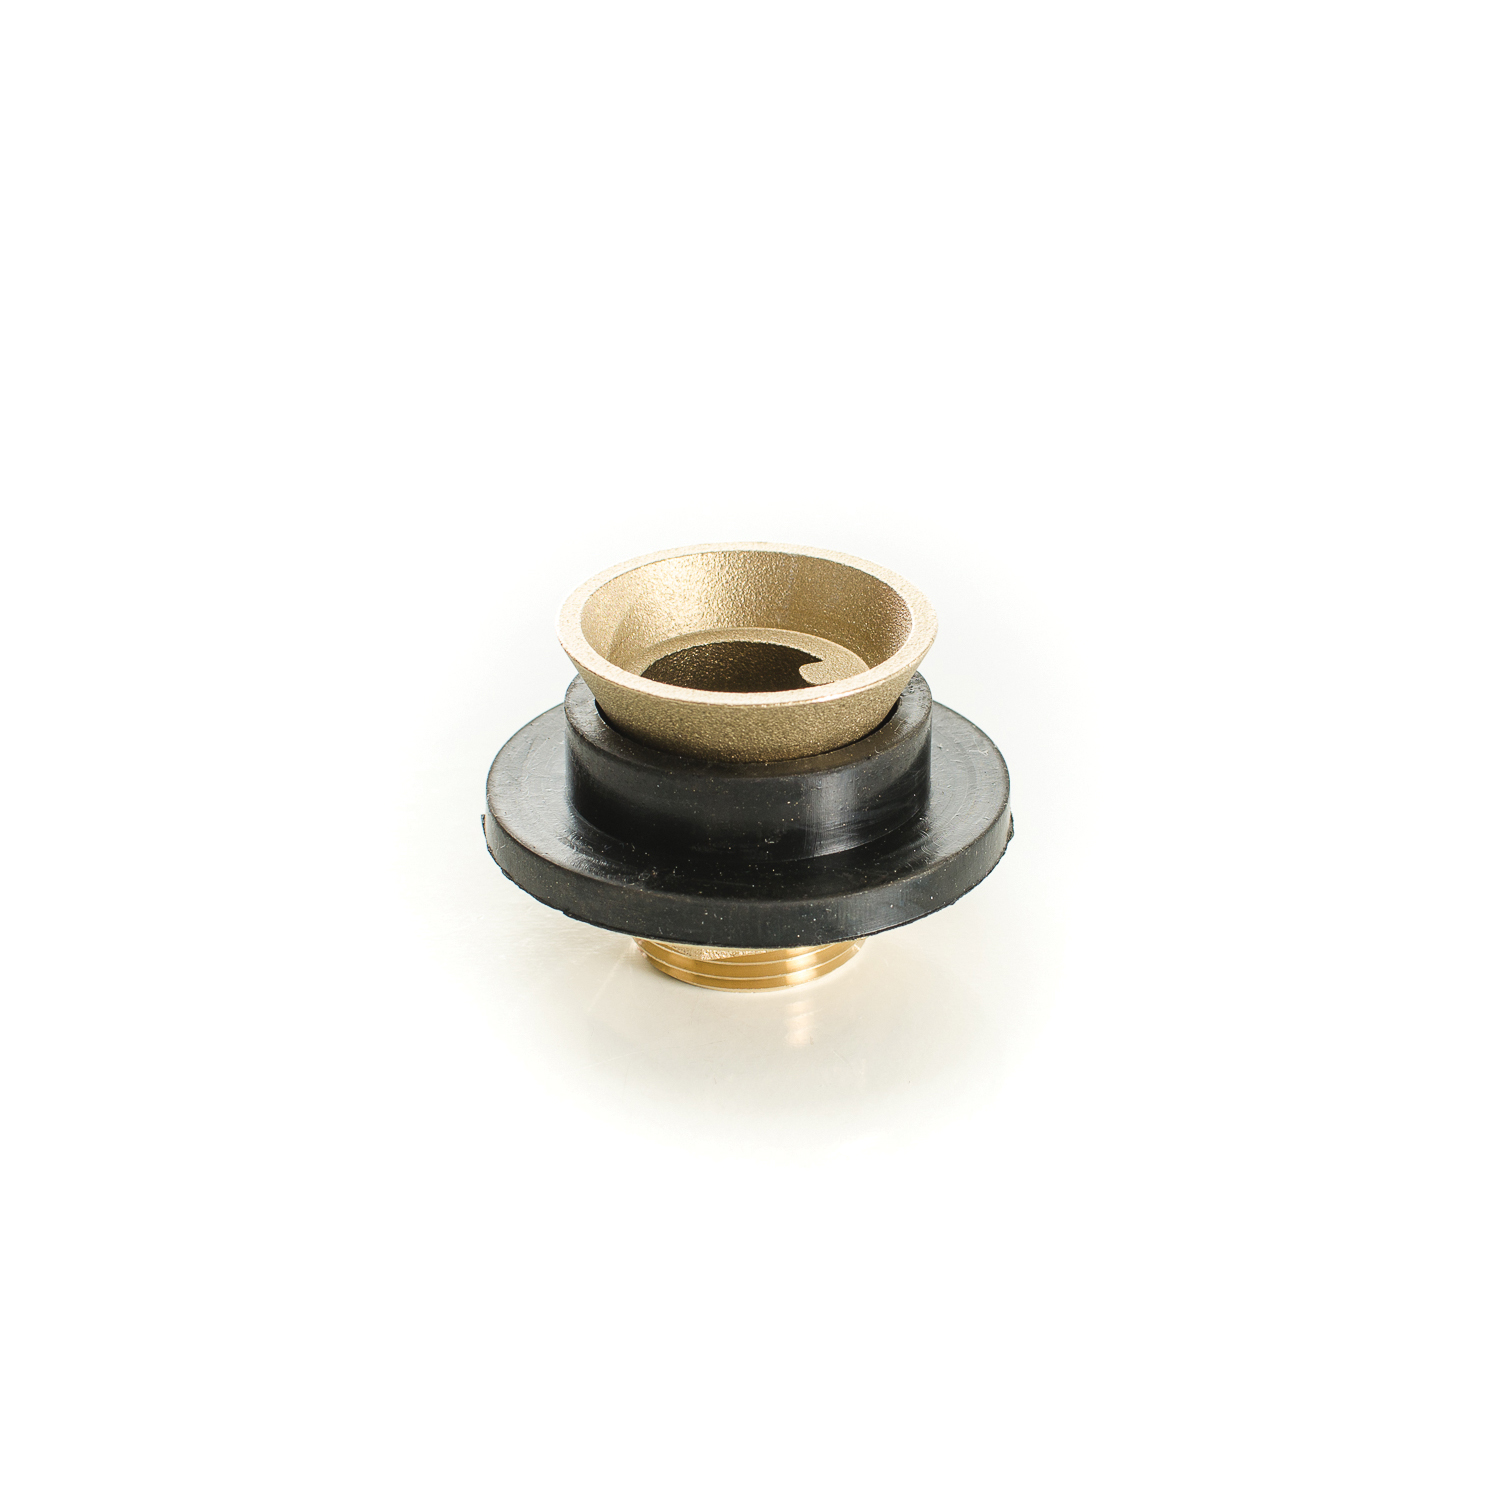 PASCO 961 Urinal Spud With Brass Lock Nut, 1 x 3/4 in